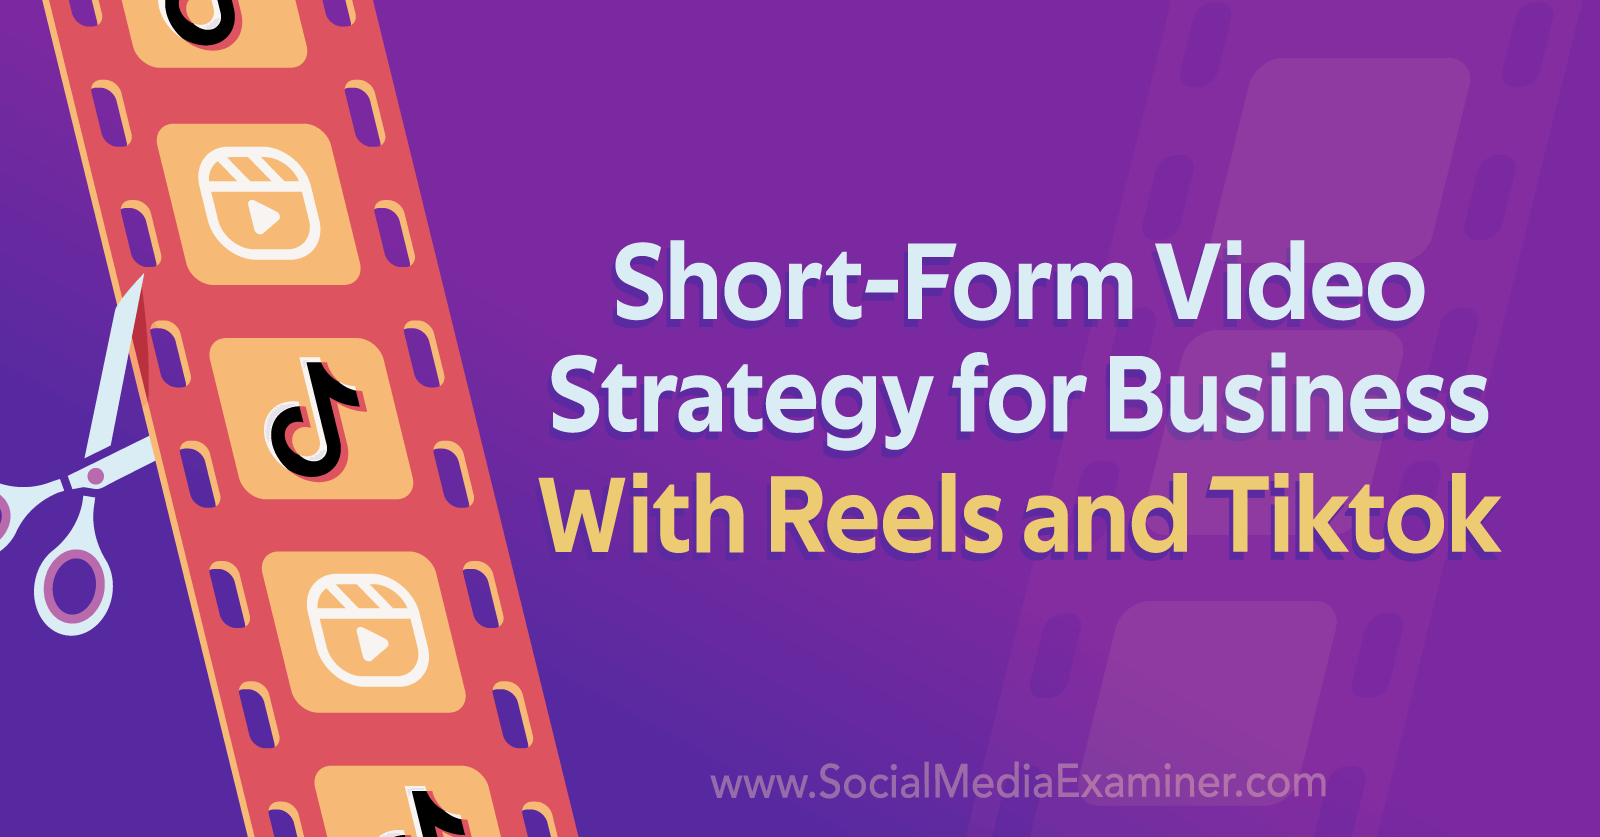 Short-Form Video Strategy for Business With Reels and TikTok by Social Media Examiner